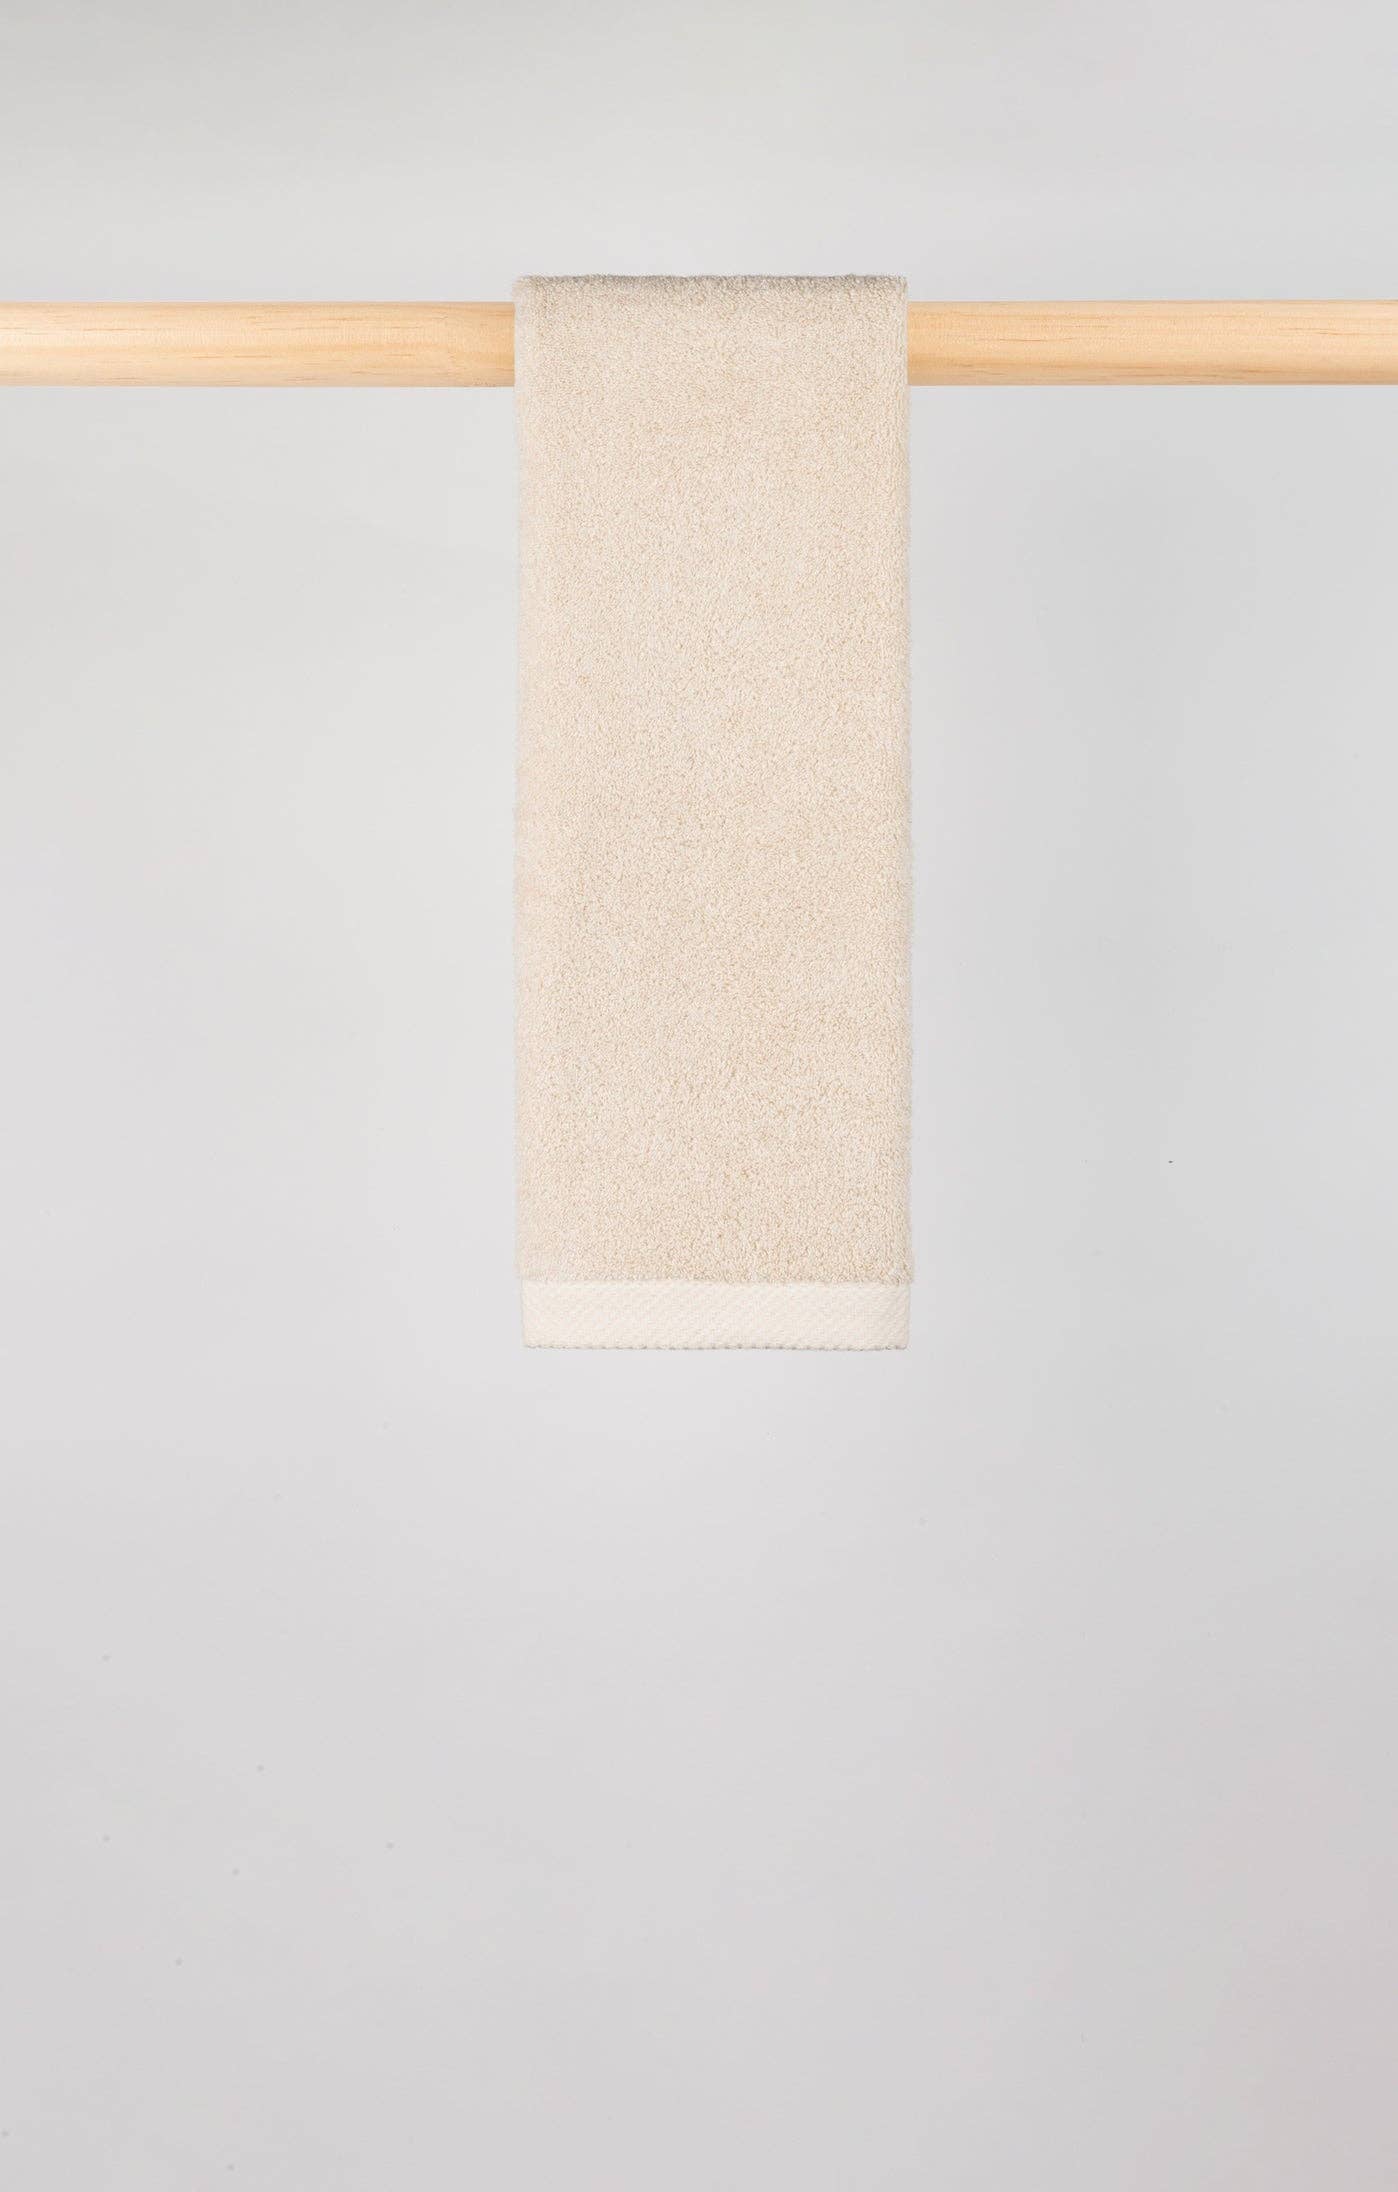 Image of Natural Torres Novas X Zero hand towel hanging on a wooden rail